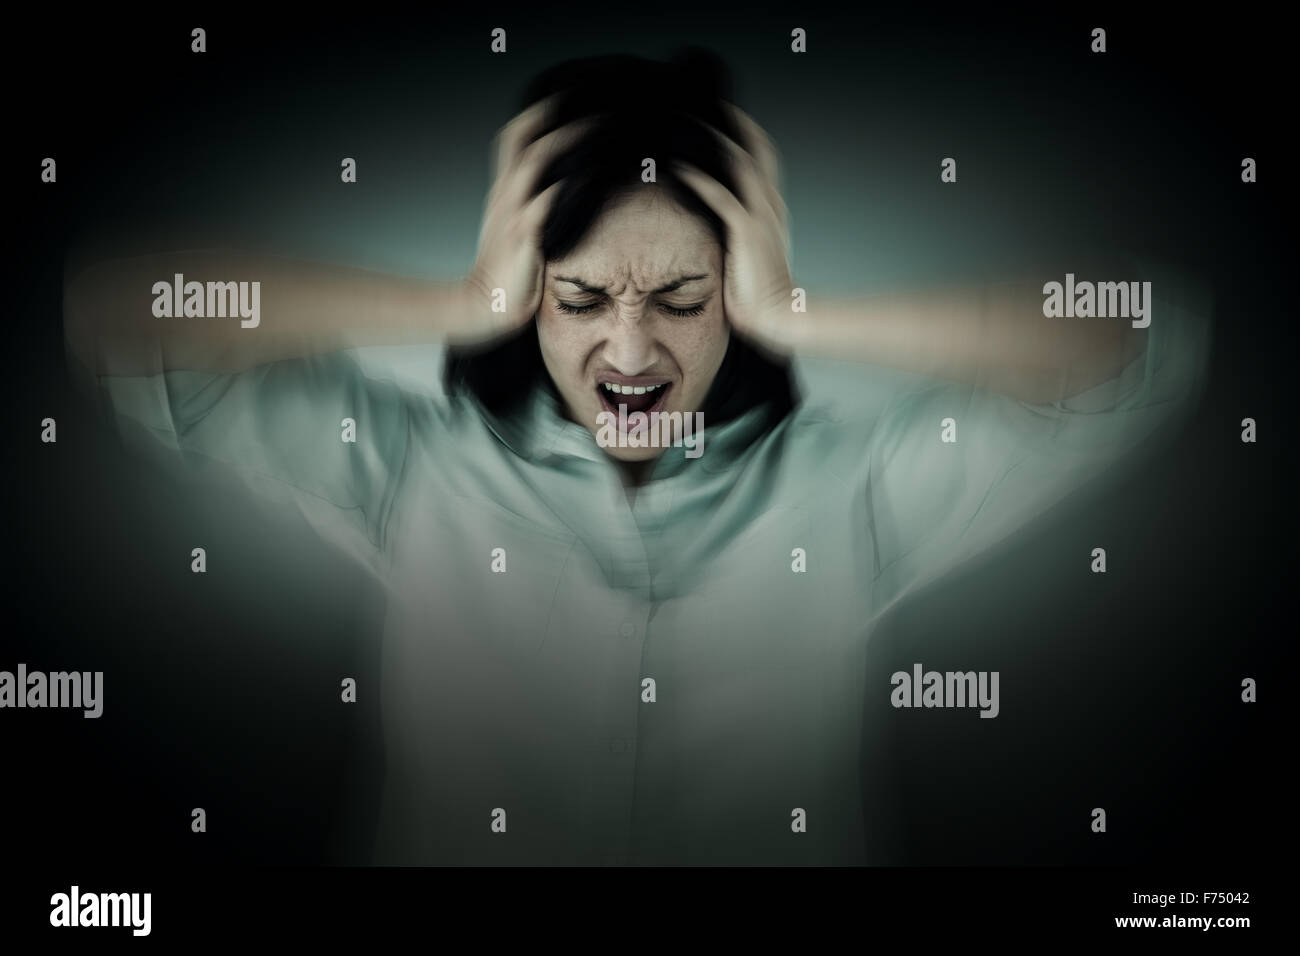 Composite image of depressed woman shouting Stock Photo